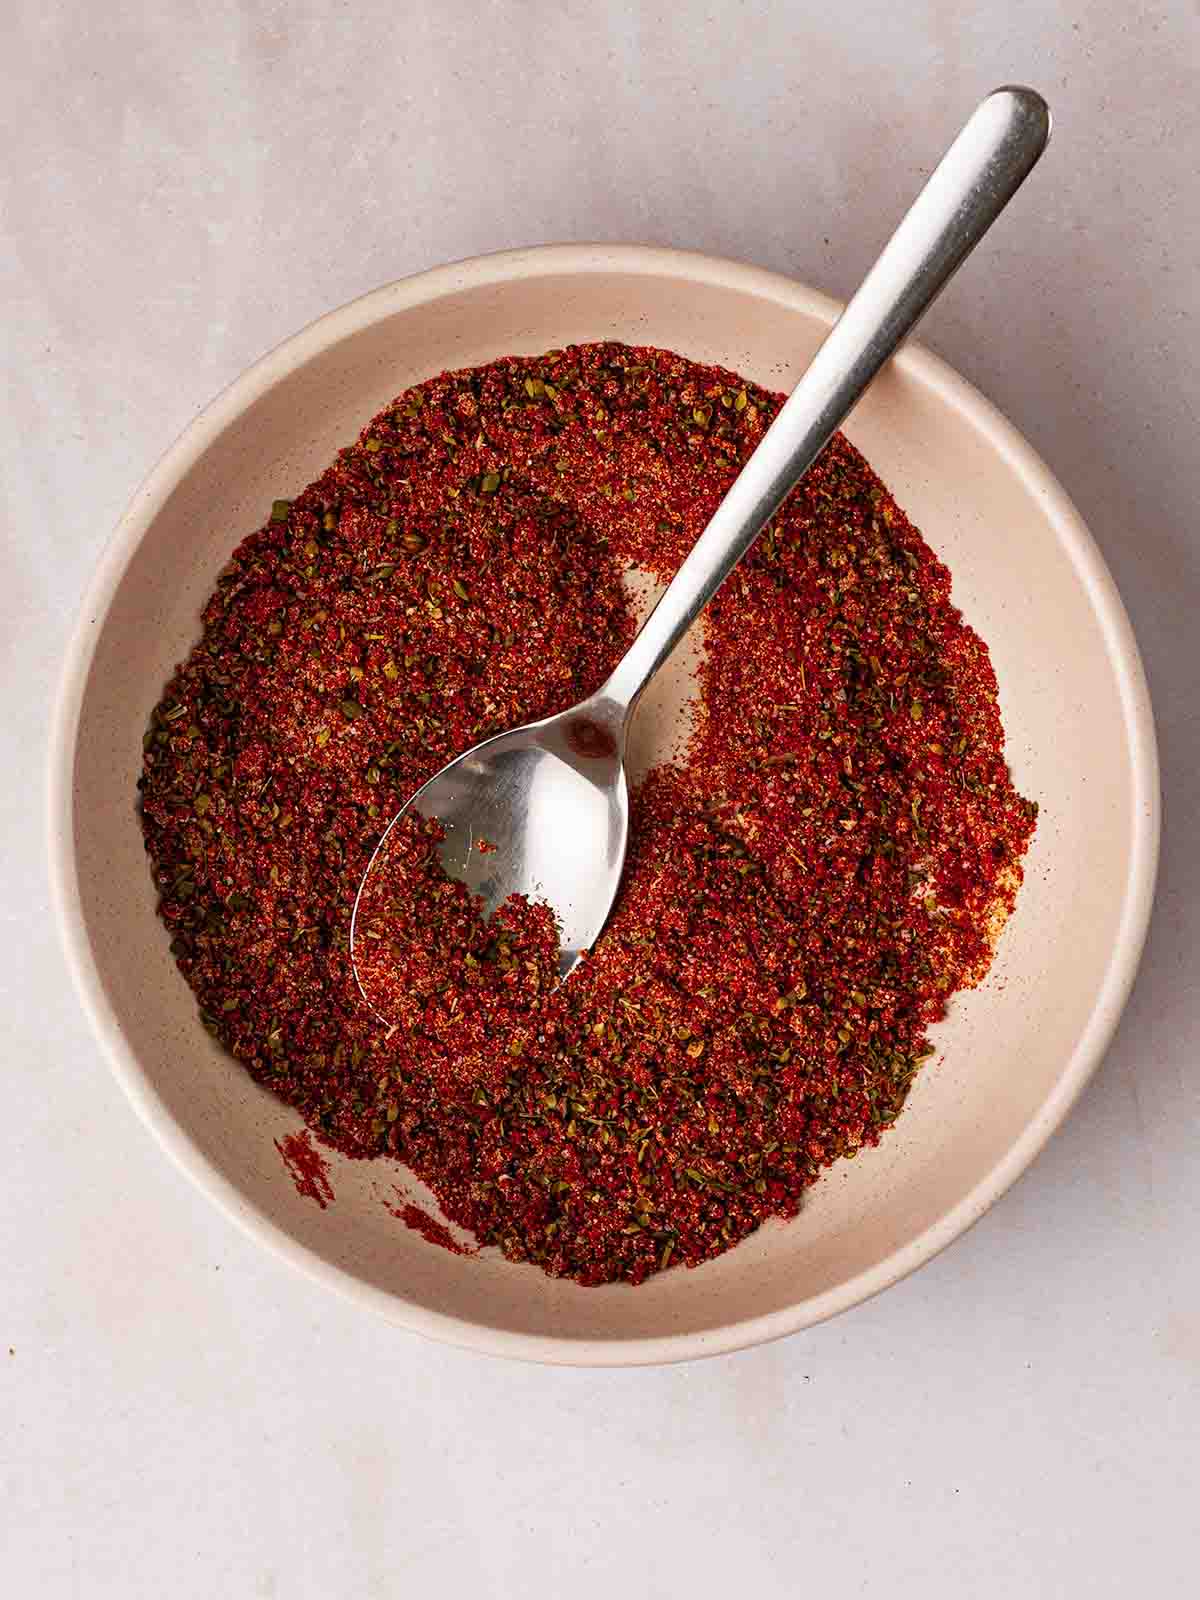 A reddish brown spice mix in a white bowl with a spoon inside.